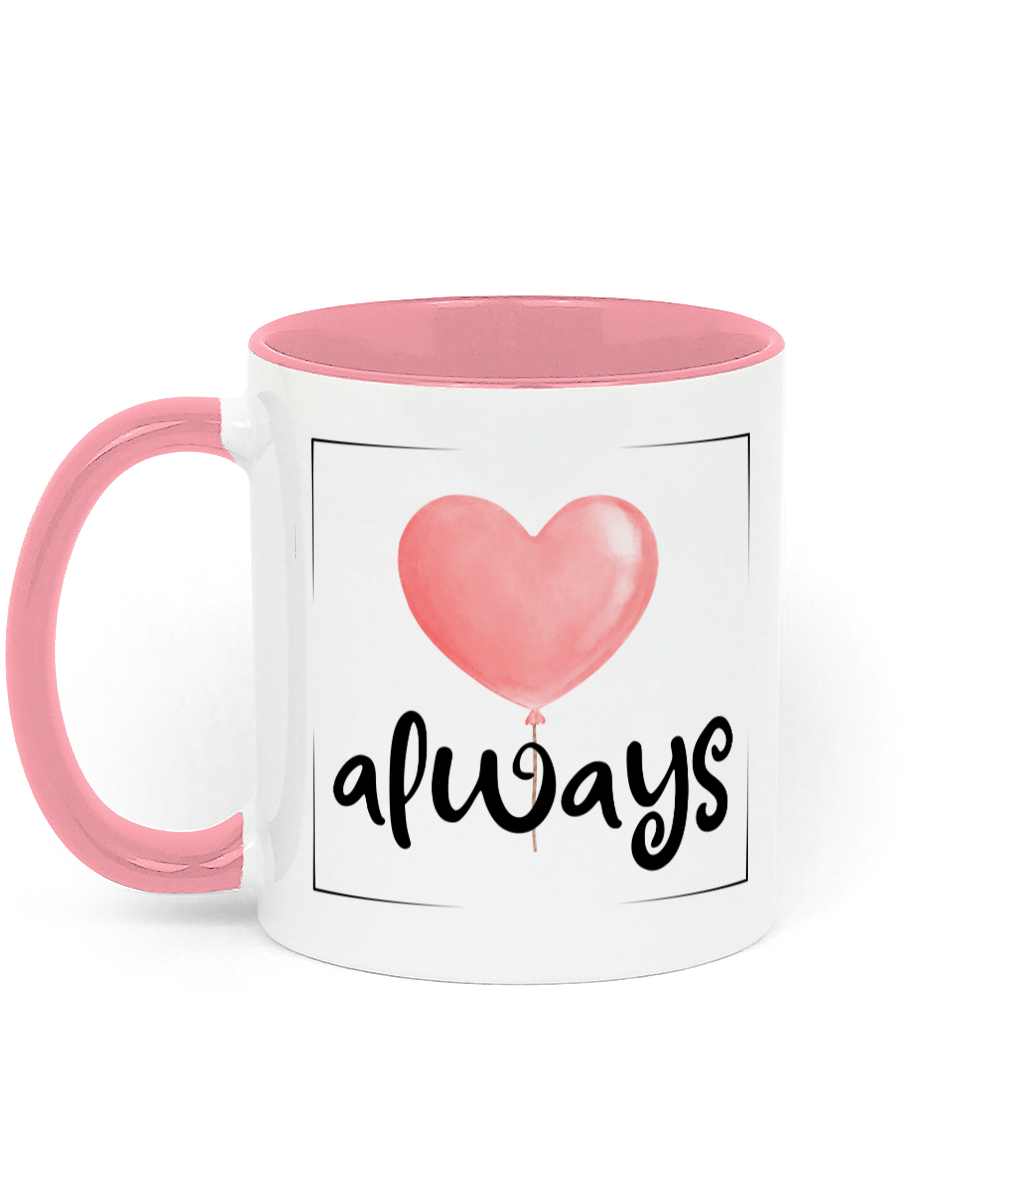 Love Always. .11 oz mug. Love. Thoughtfulness.Daily Affirmations, Motivation, Inspiration. Perfect Gift. Two-Toned. Pink.